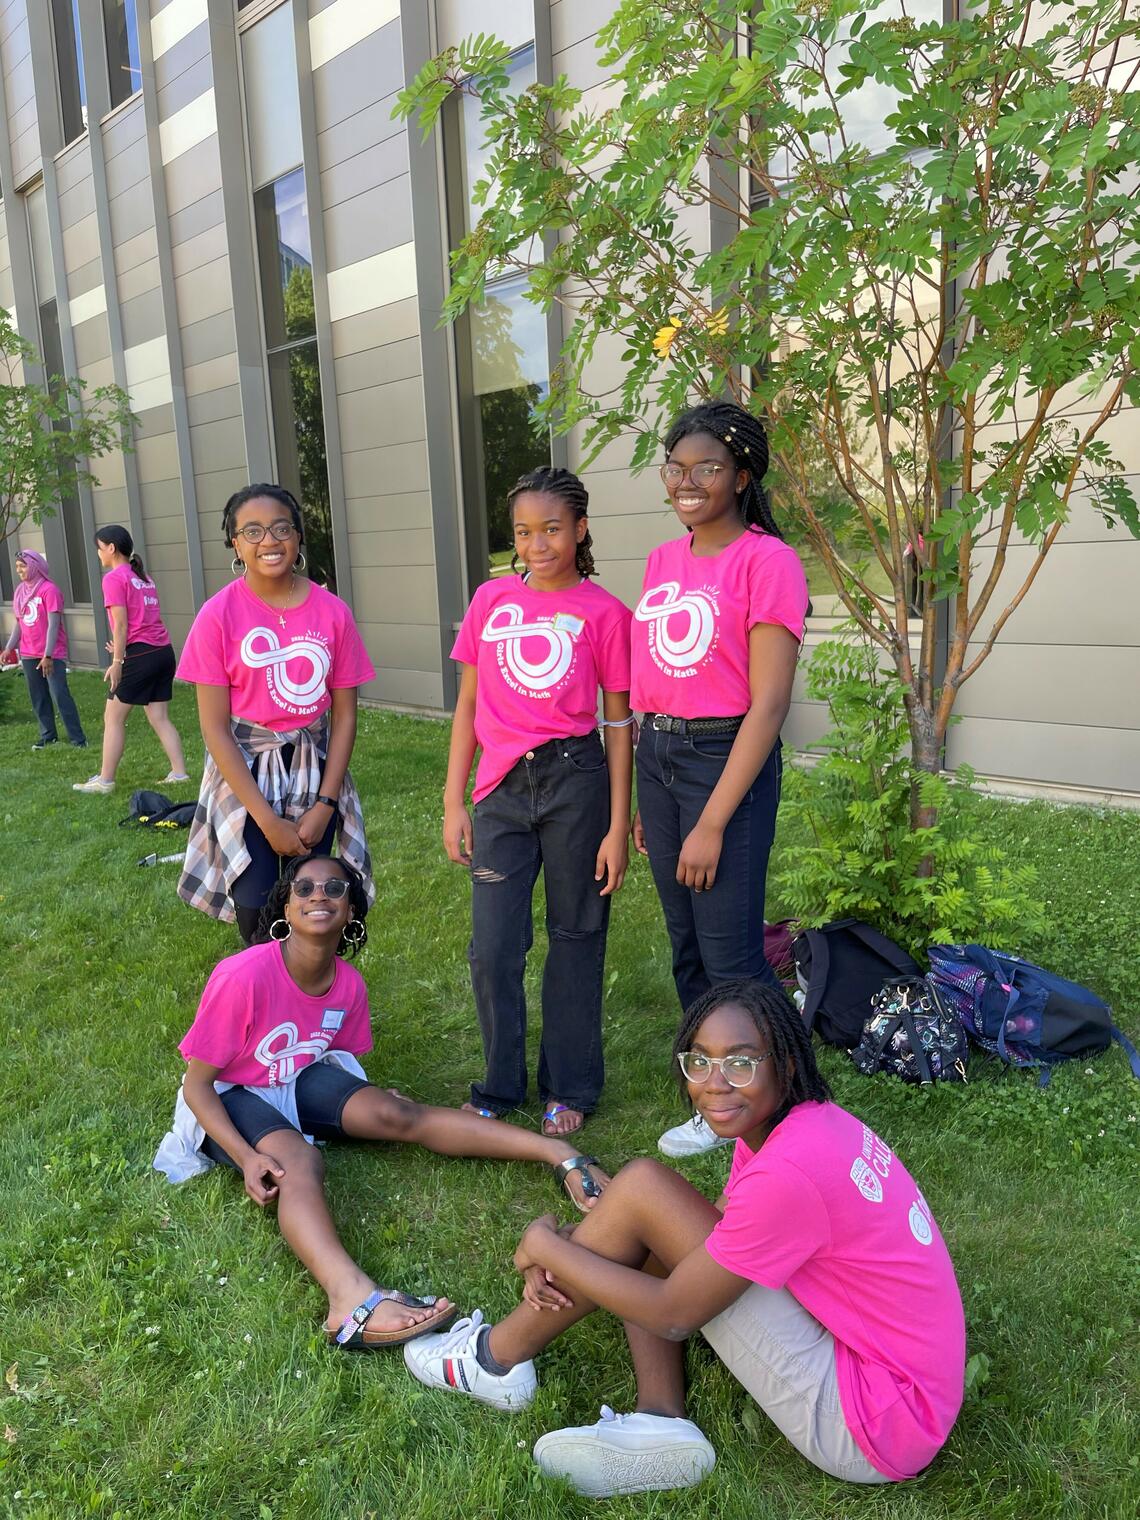 Girls' math camp participants in pink t-shirts, standing outside